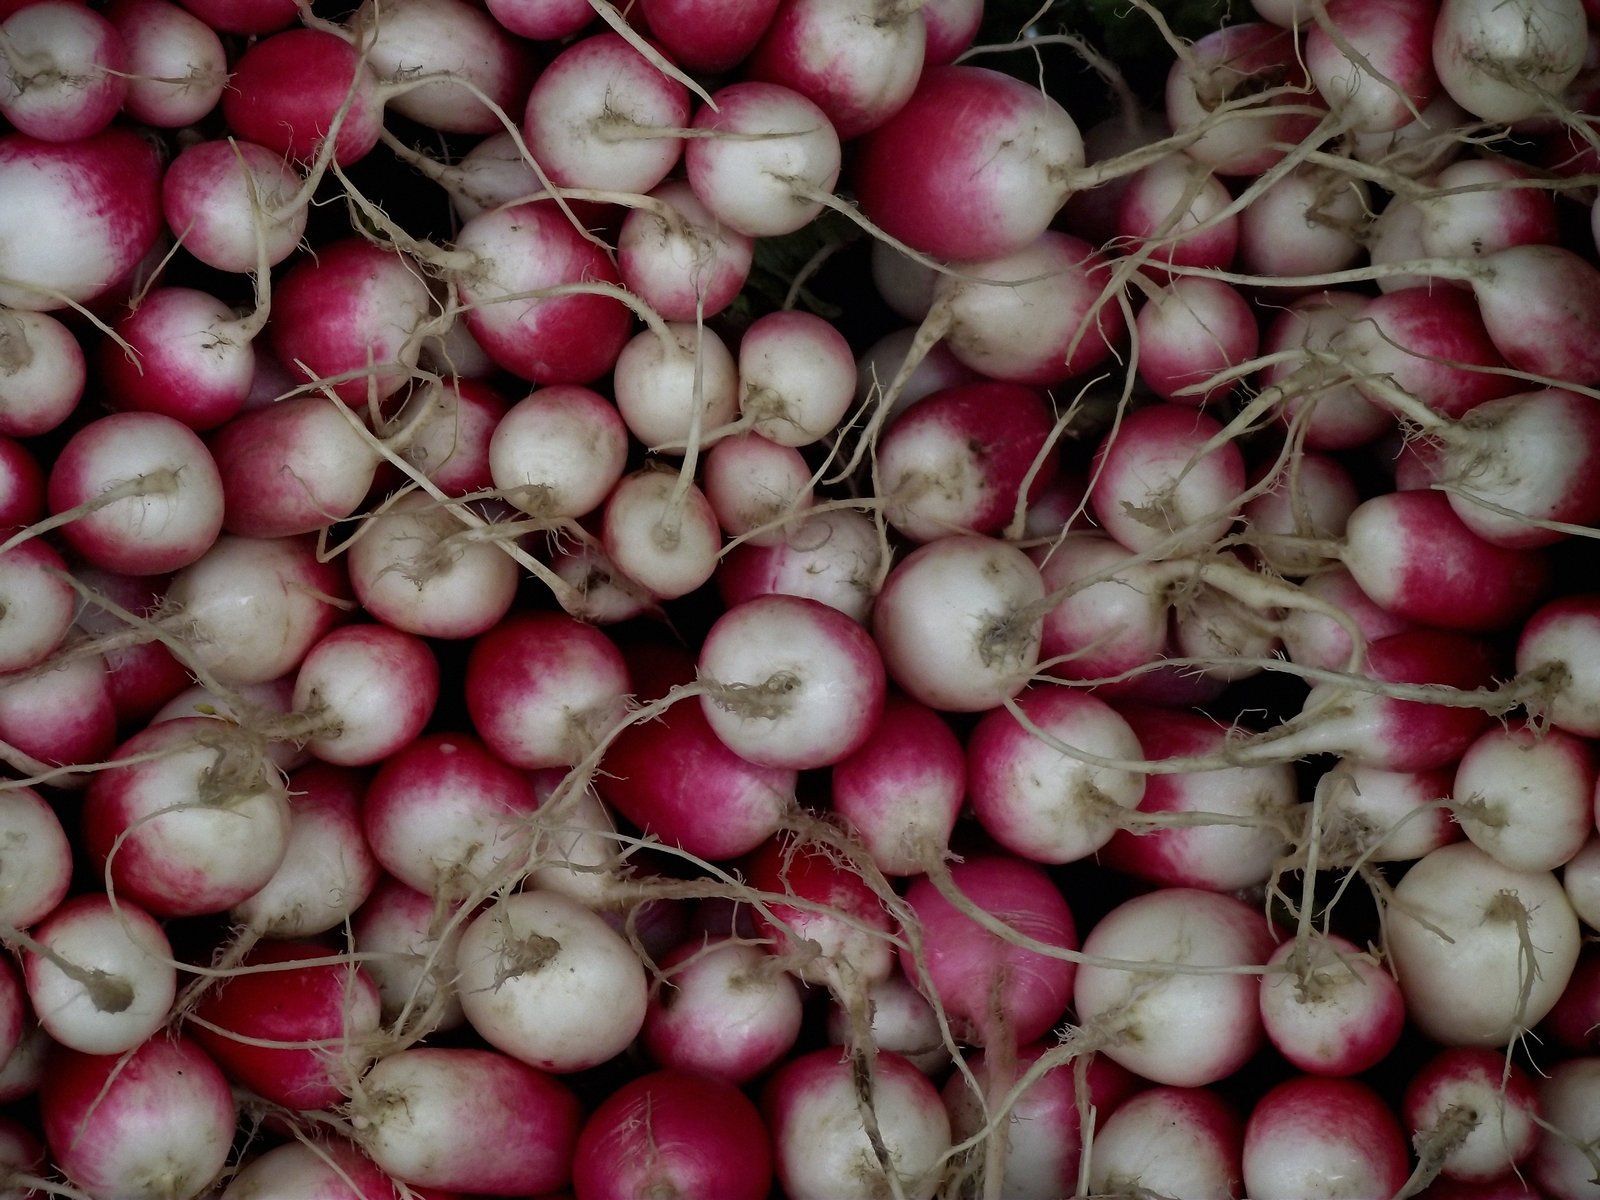 many radishes sitting next to each other